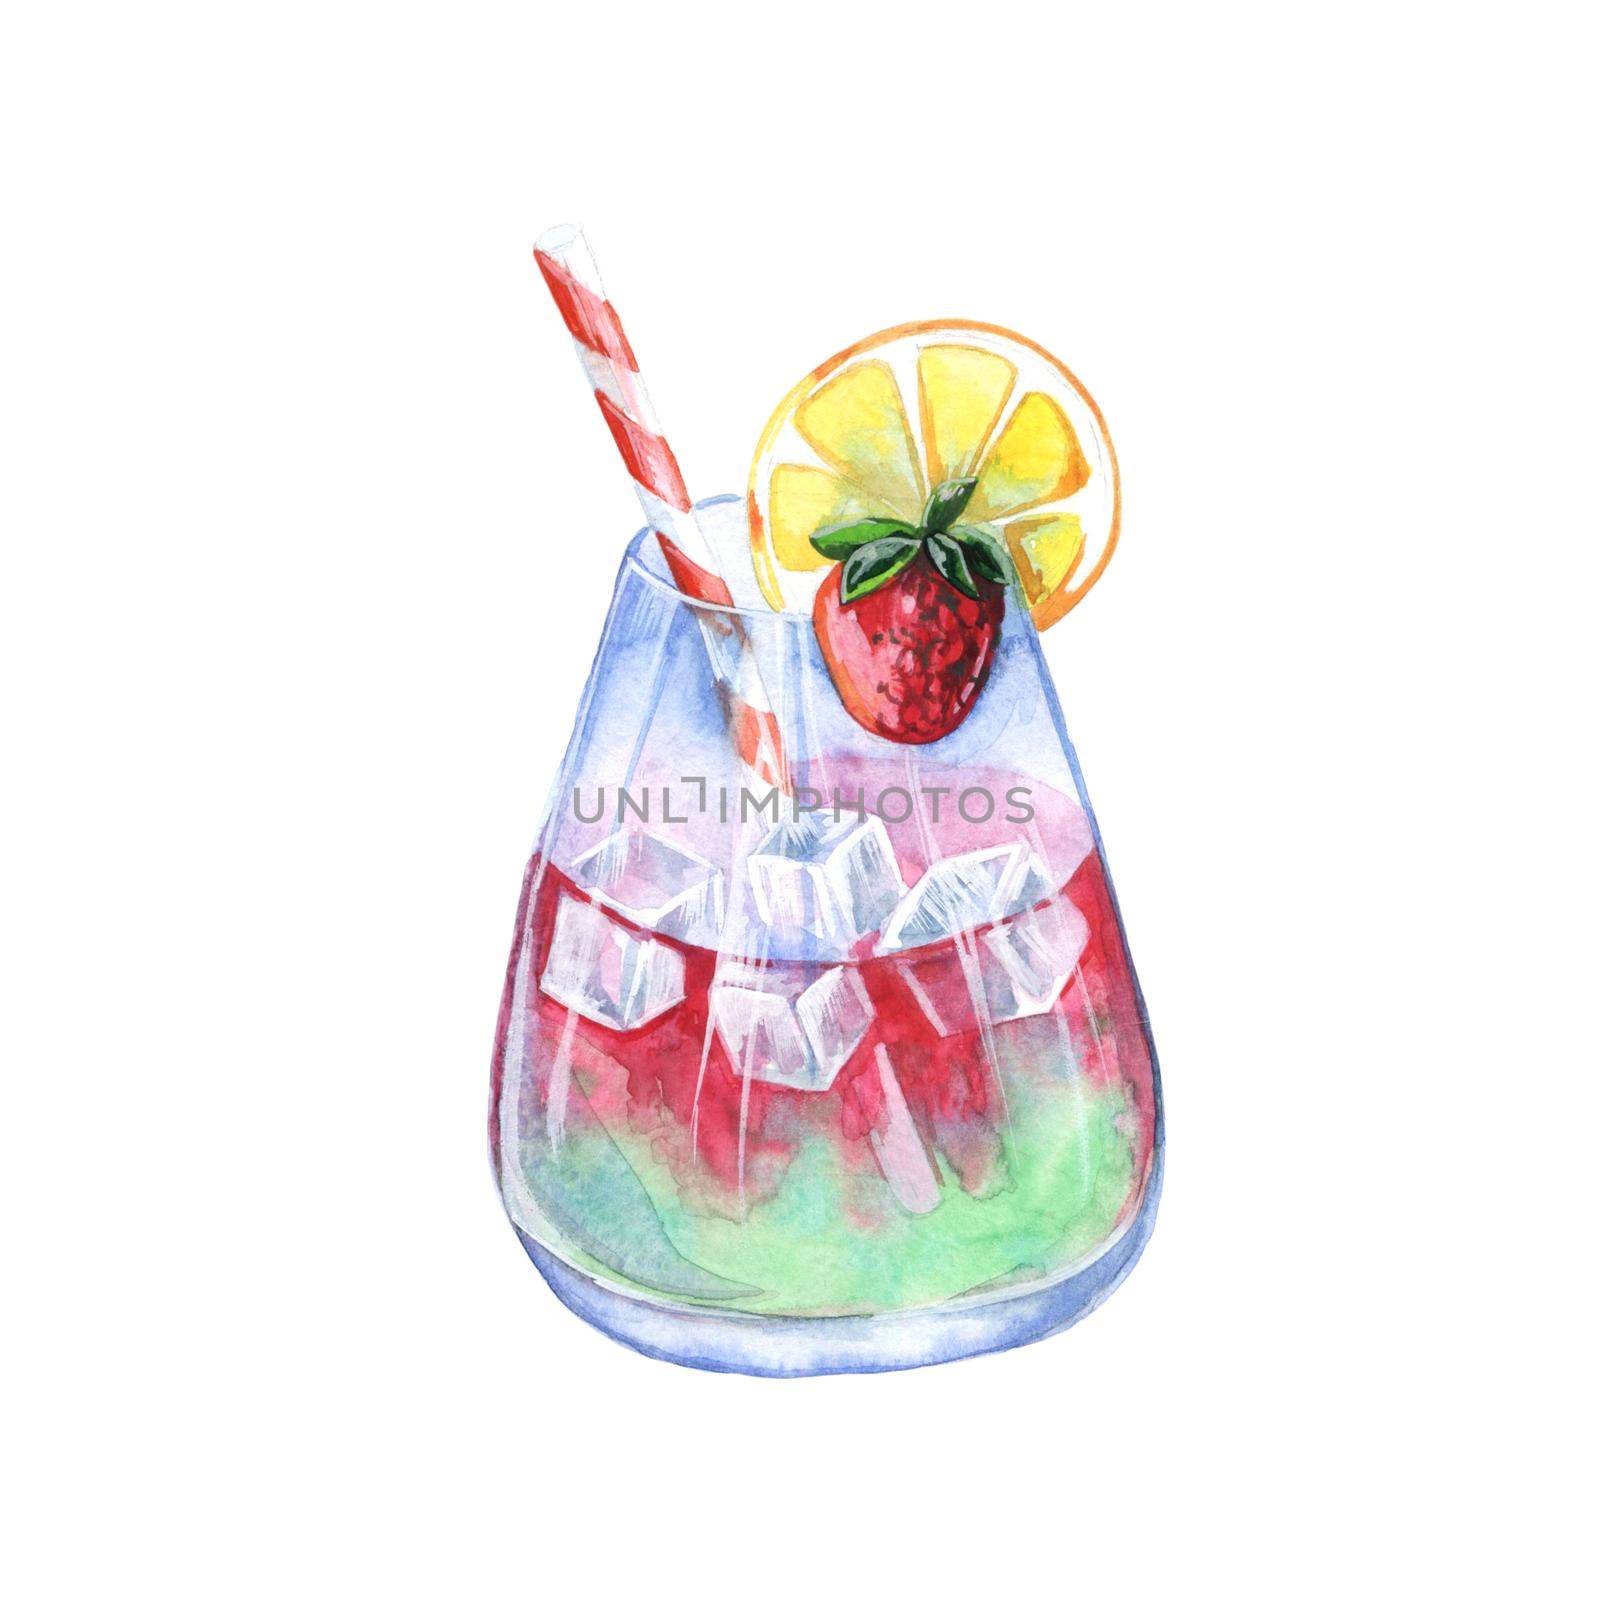 Watercolor lemonade with lemon, ice and srawberry. Hand drawn isolated summer drink glass on white background. Artistic illustration.